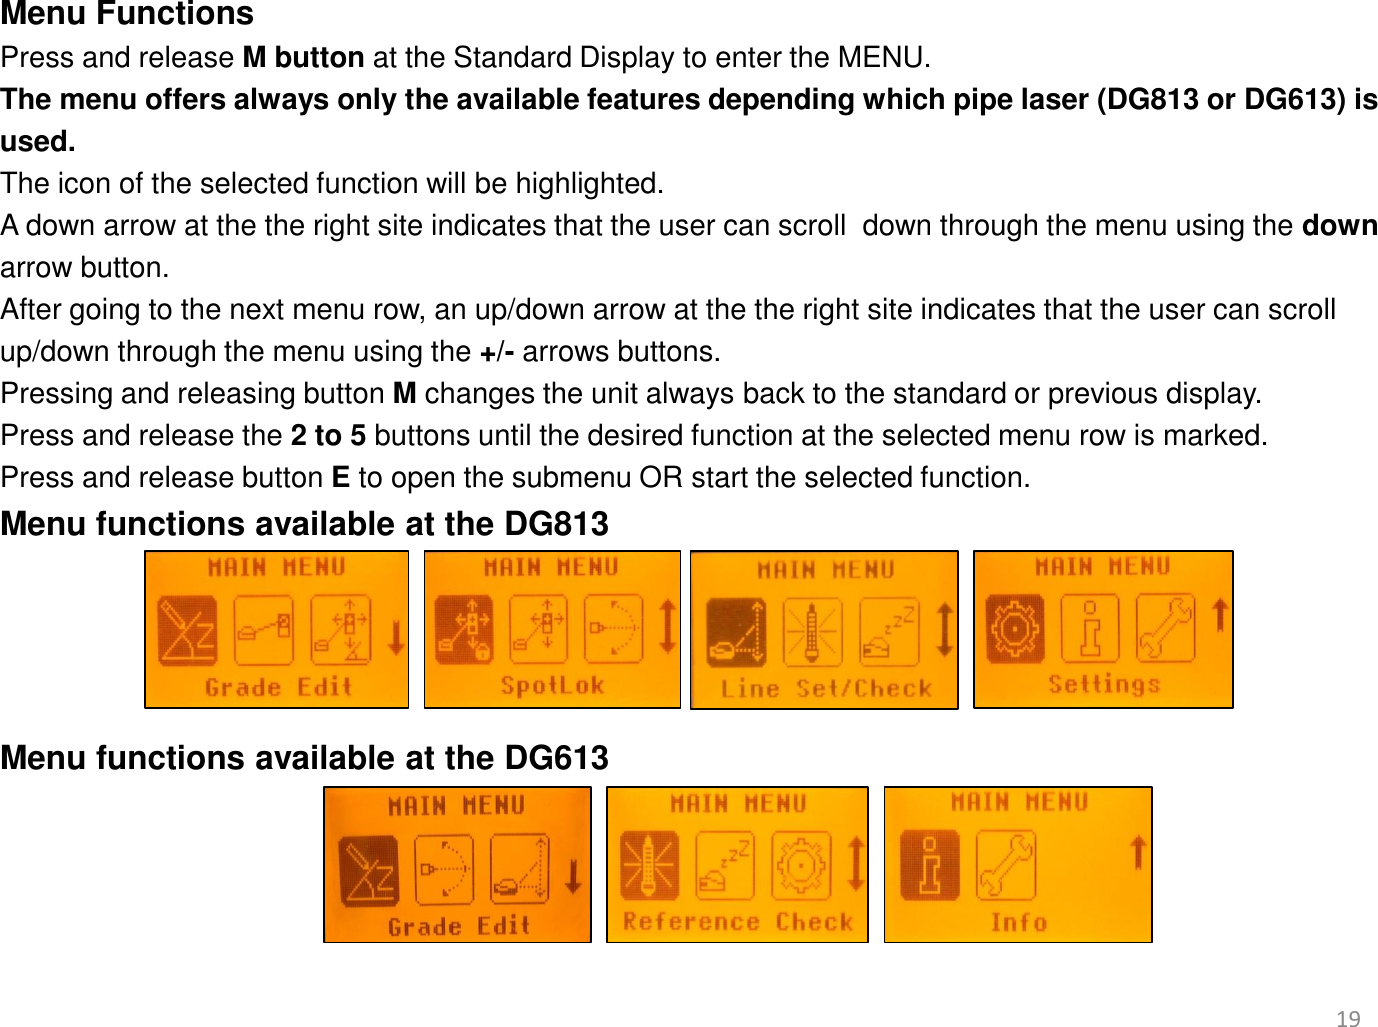 19 Menu Functions  Press and release M button at the Standard Display to enter the MENU.  The menu offers always only the available features depending which pipe laser (DG813 or DG613) is  used.  The icon of the selected function will be highlighted.  A down arrow at the the right site indicates that the user can scroll  down through the menu using the down  arrow button. After going to the next menu row, an up/down arrow at the the right site indicates that the user can scroll   up/down through the menu using the +/- arrows buttons. Pressing and releasing button M changes the unit always back to the standard or previous display. Press and release the 2 to 5 buttons until the desired function at the selected menu row is marked.  Press and release button E to open the submenu OR start the selected function. Menu functions available at the DG813     Menu functions available at the DG613   